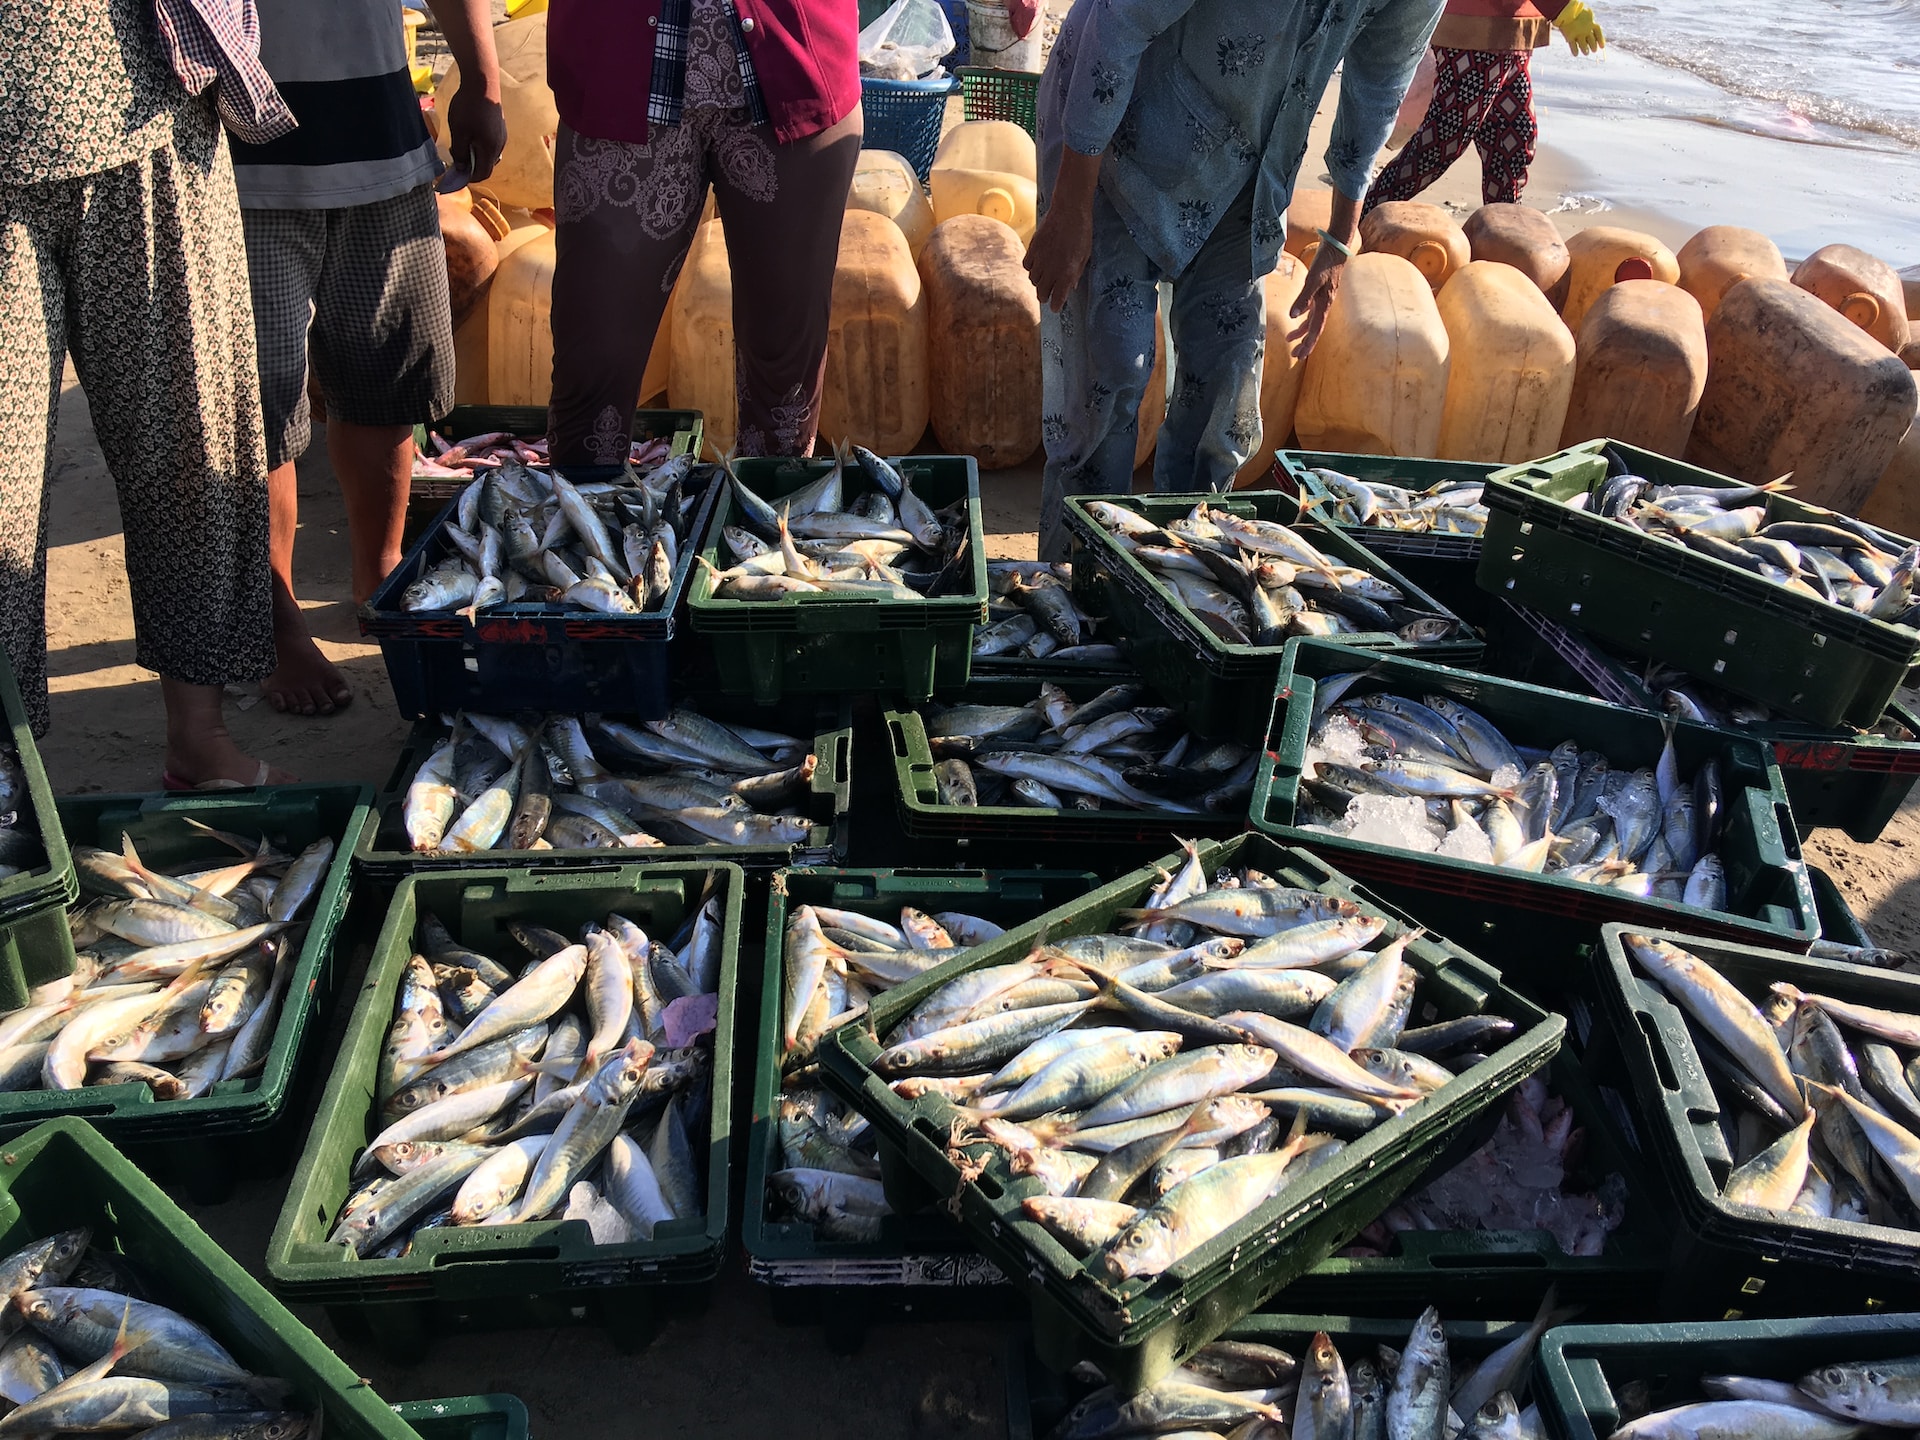 4 men glance at tens of crates of fish after being caught in a commercial fishing job.